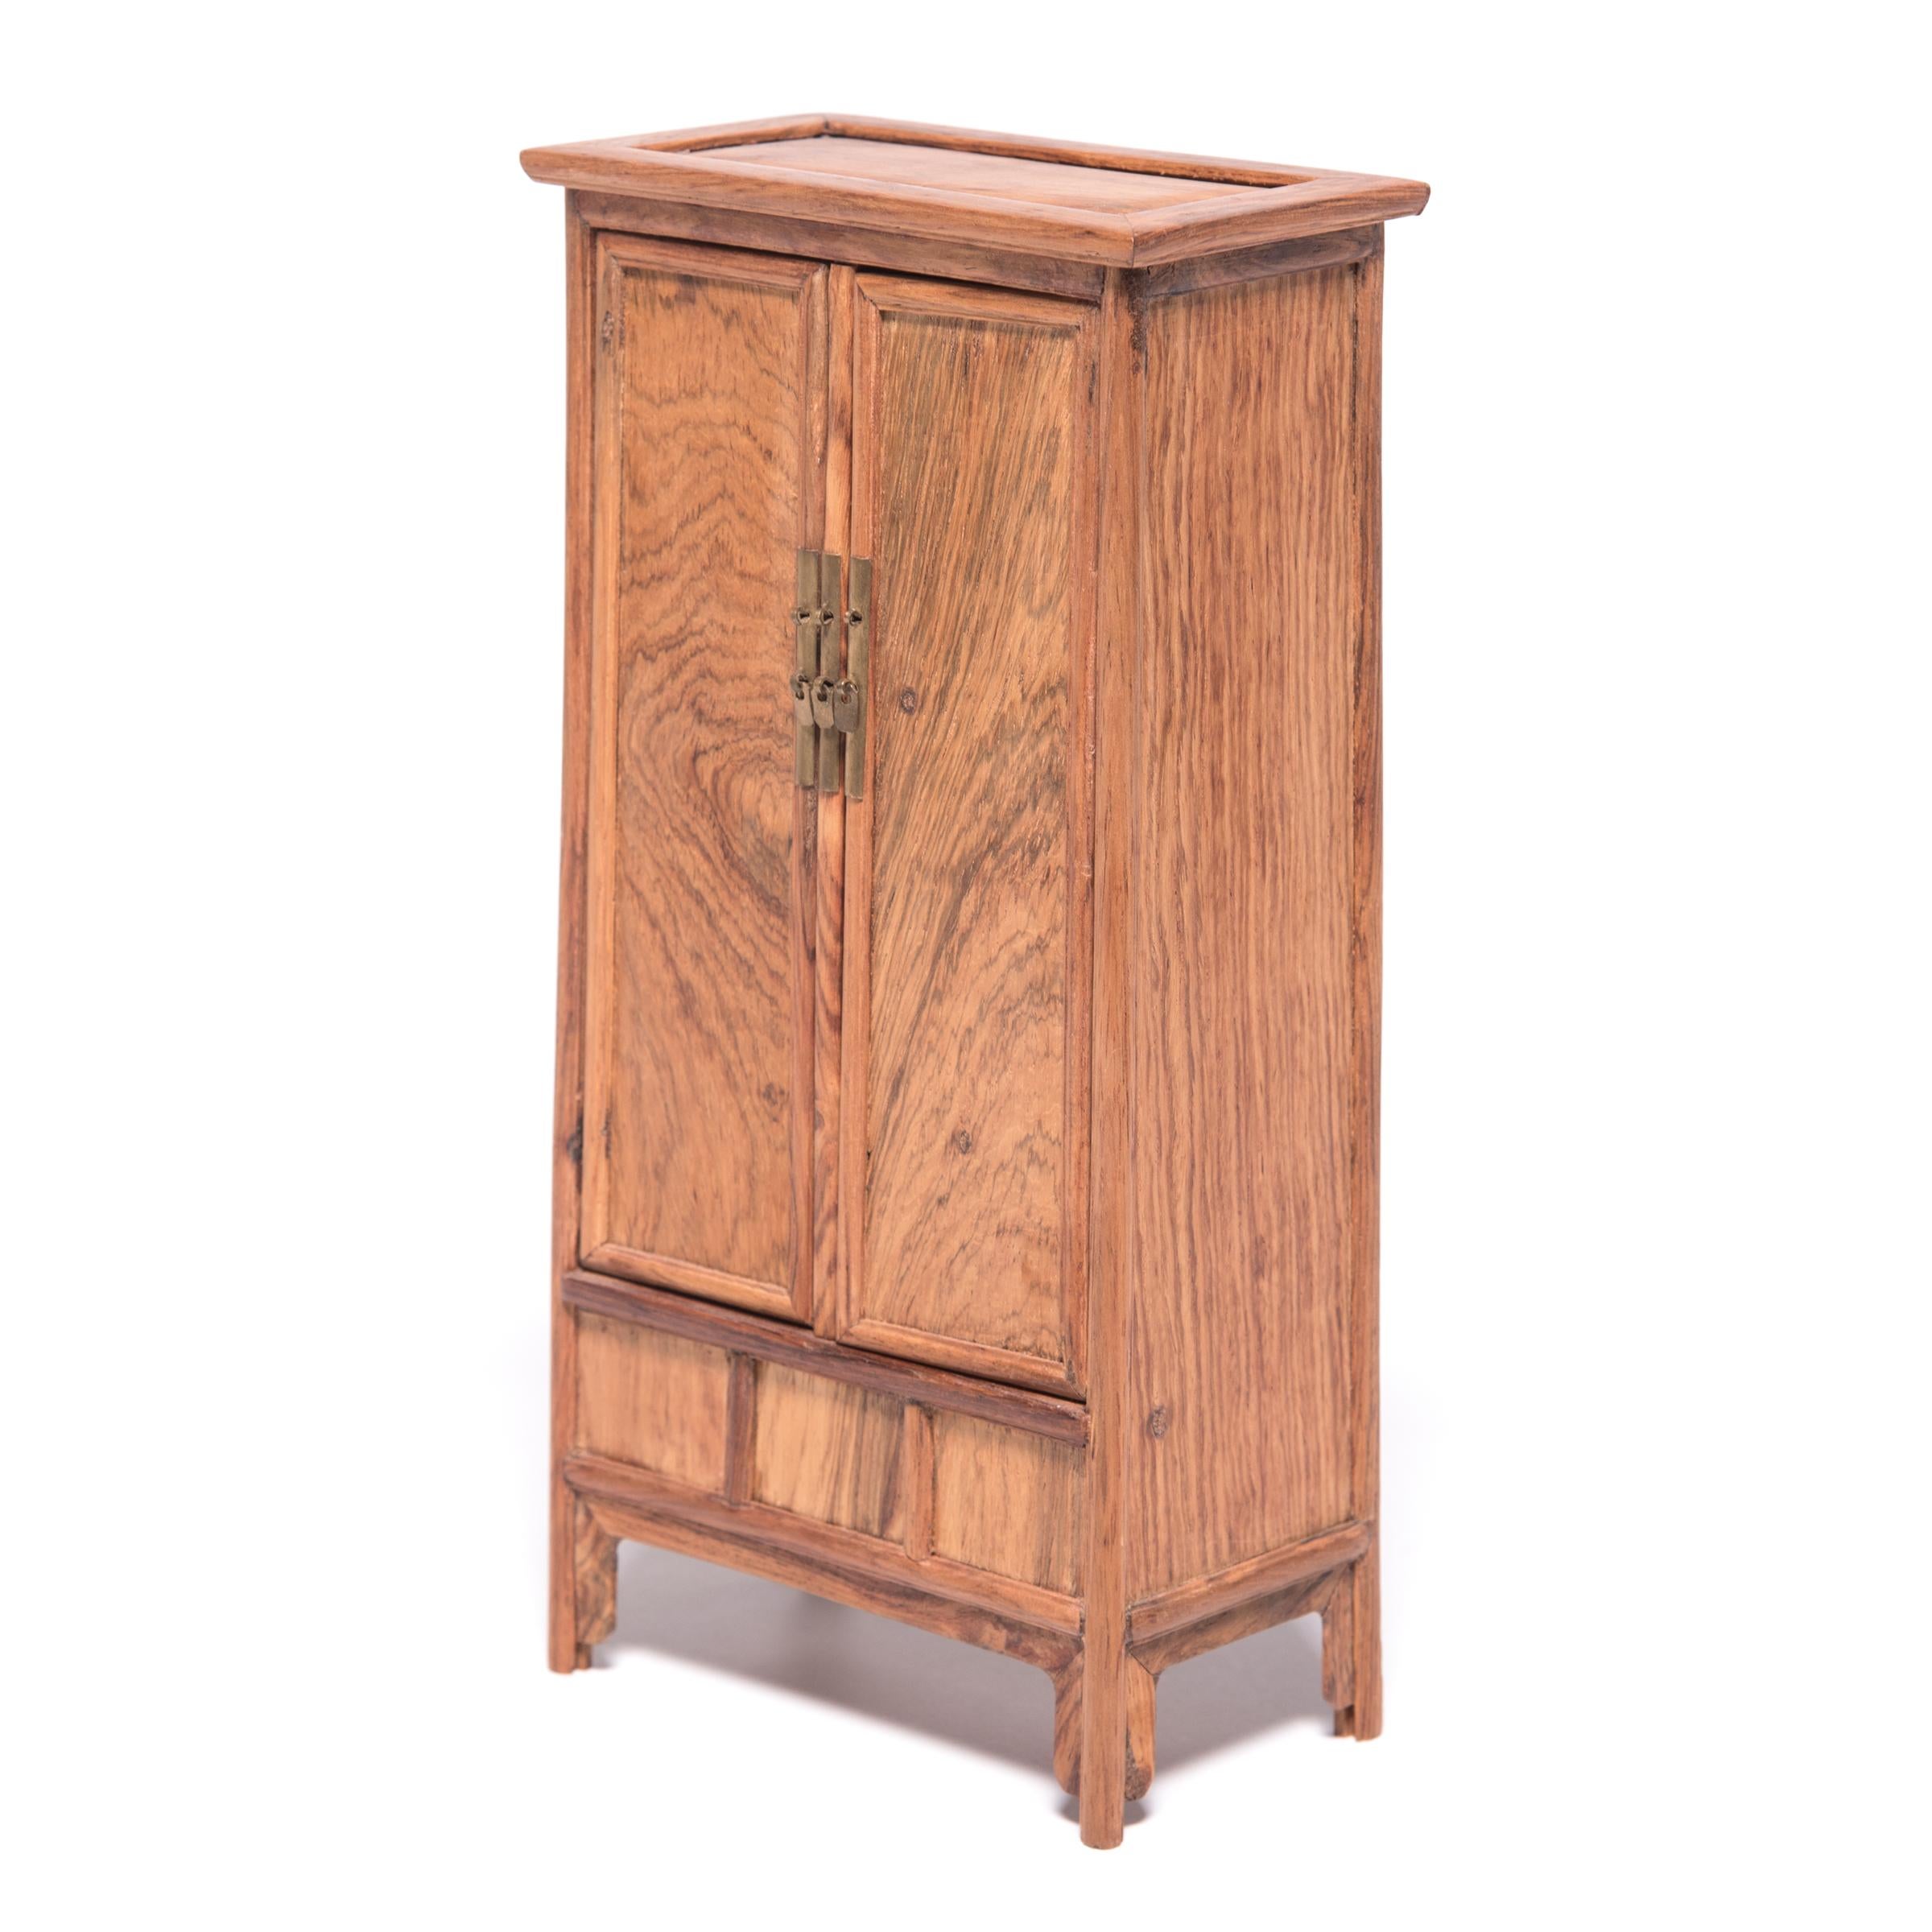 A full size cabinet with this level of workmanship would be an incredible find, but this beautiful piece of furniture, at only nine inches tall, is perfectly constructed down to the tiniest minutia. The petite cabinet was made in northern China out